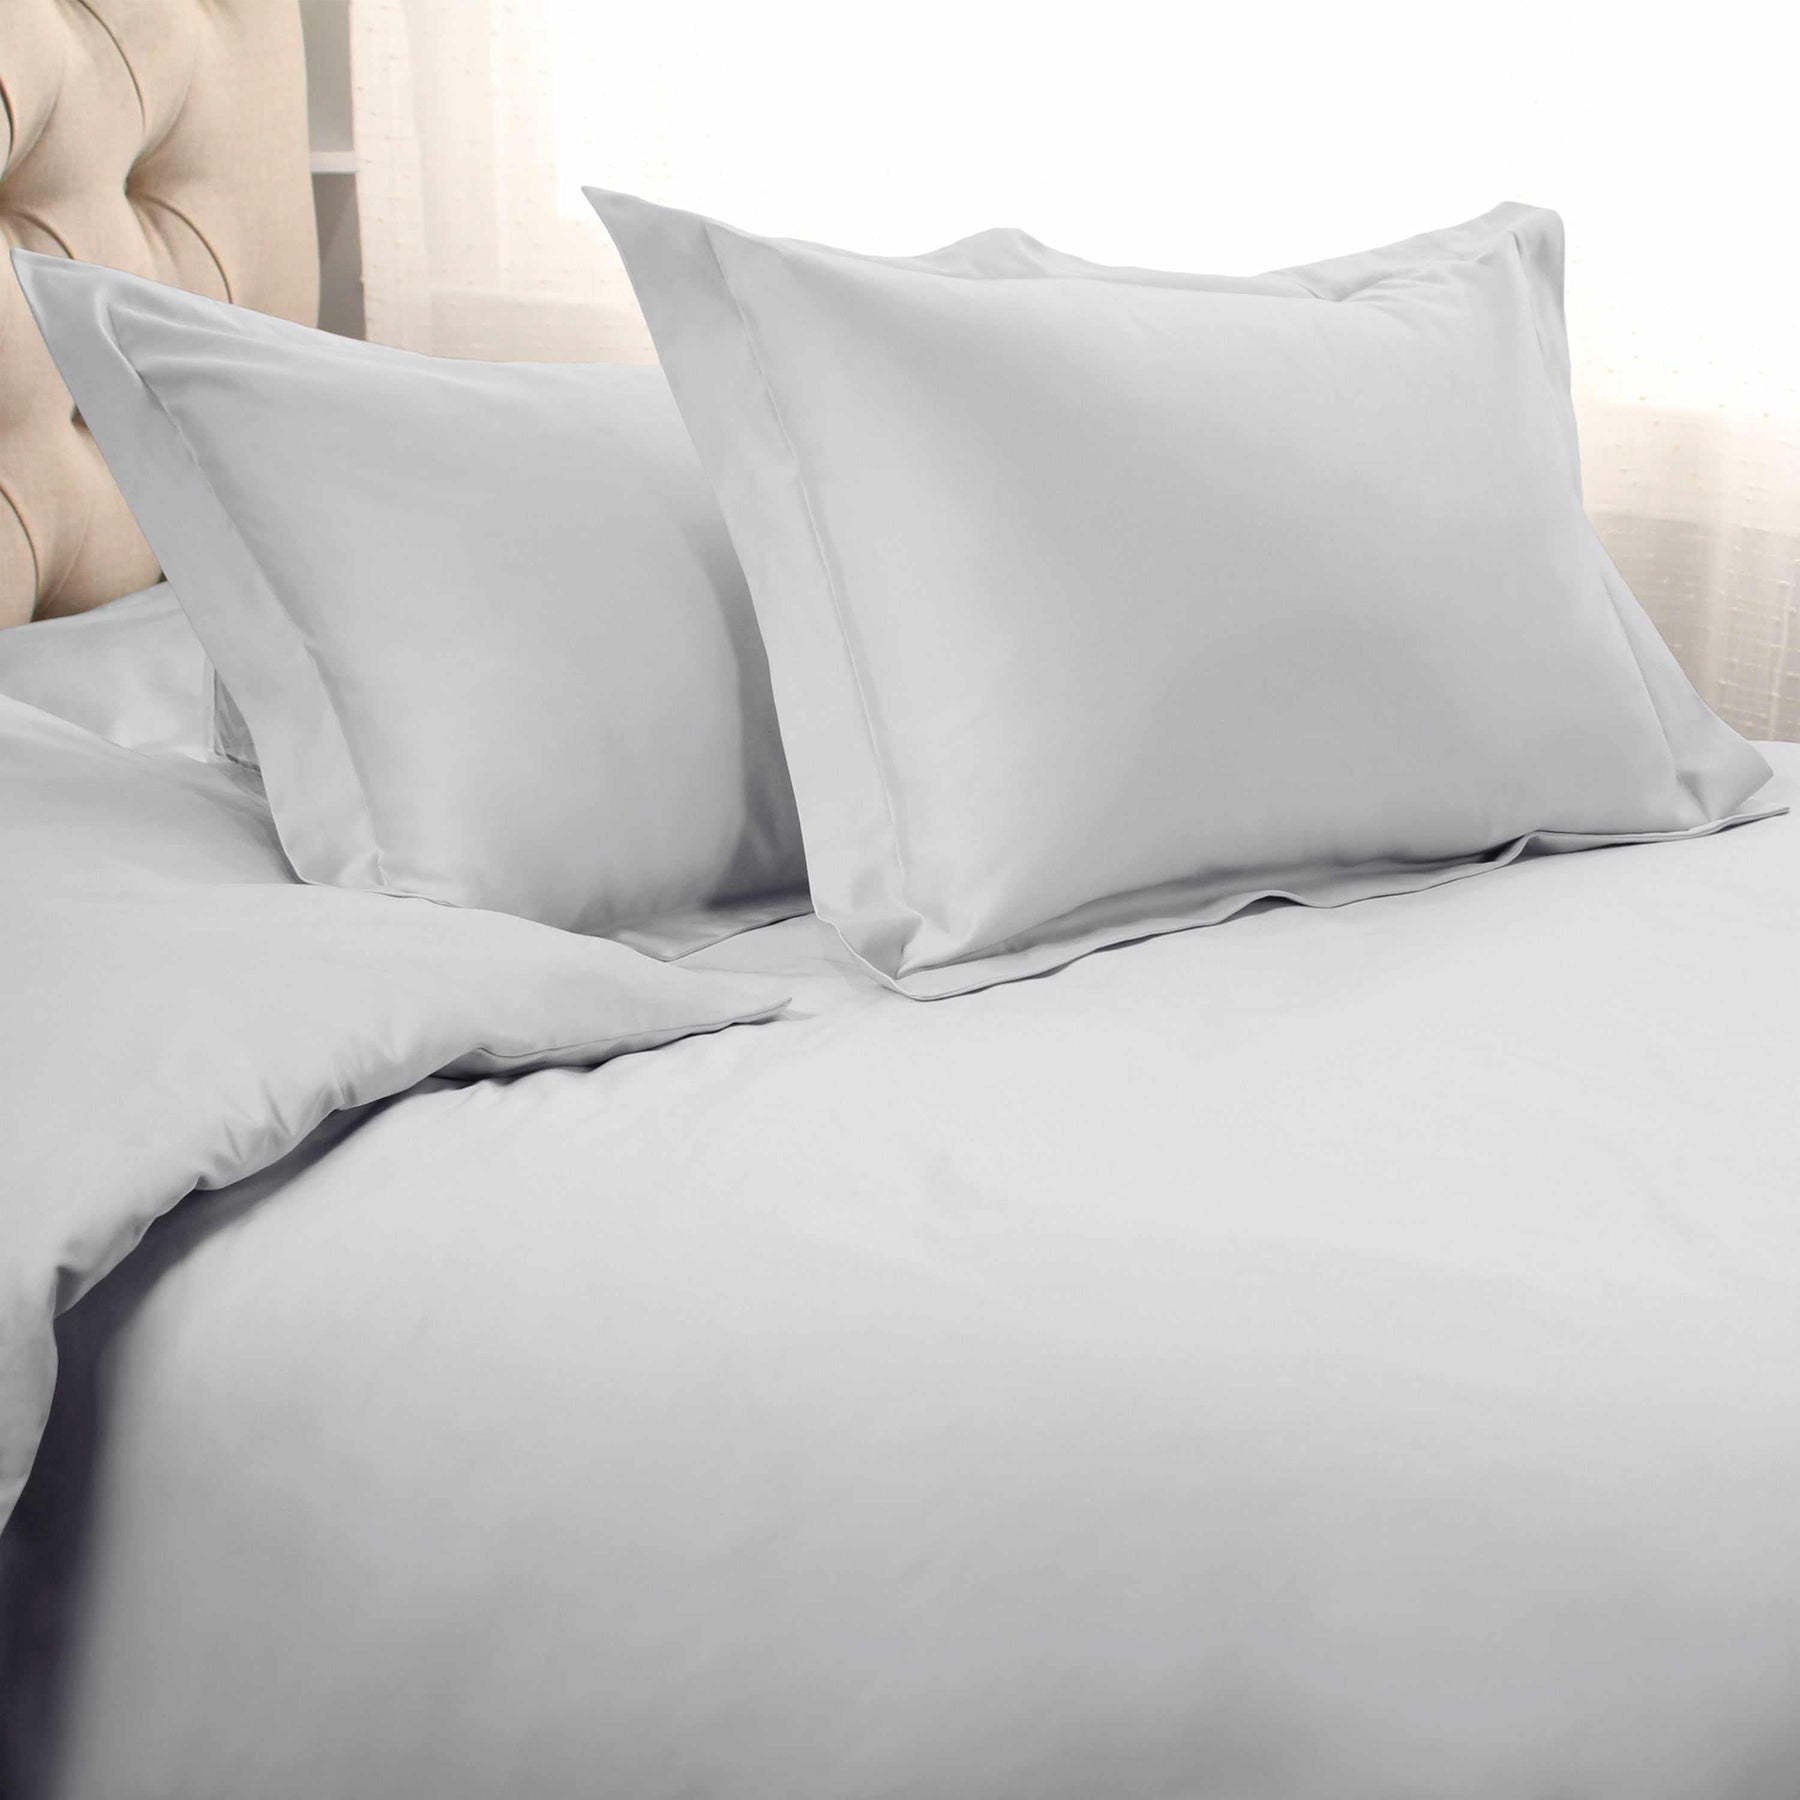  Superior Egyptian Cotton Solid All-Season Duvet Cover Set with Button Closure - Platinum